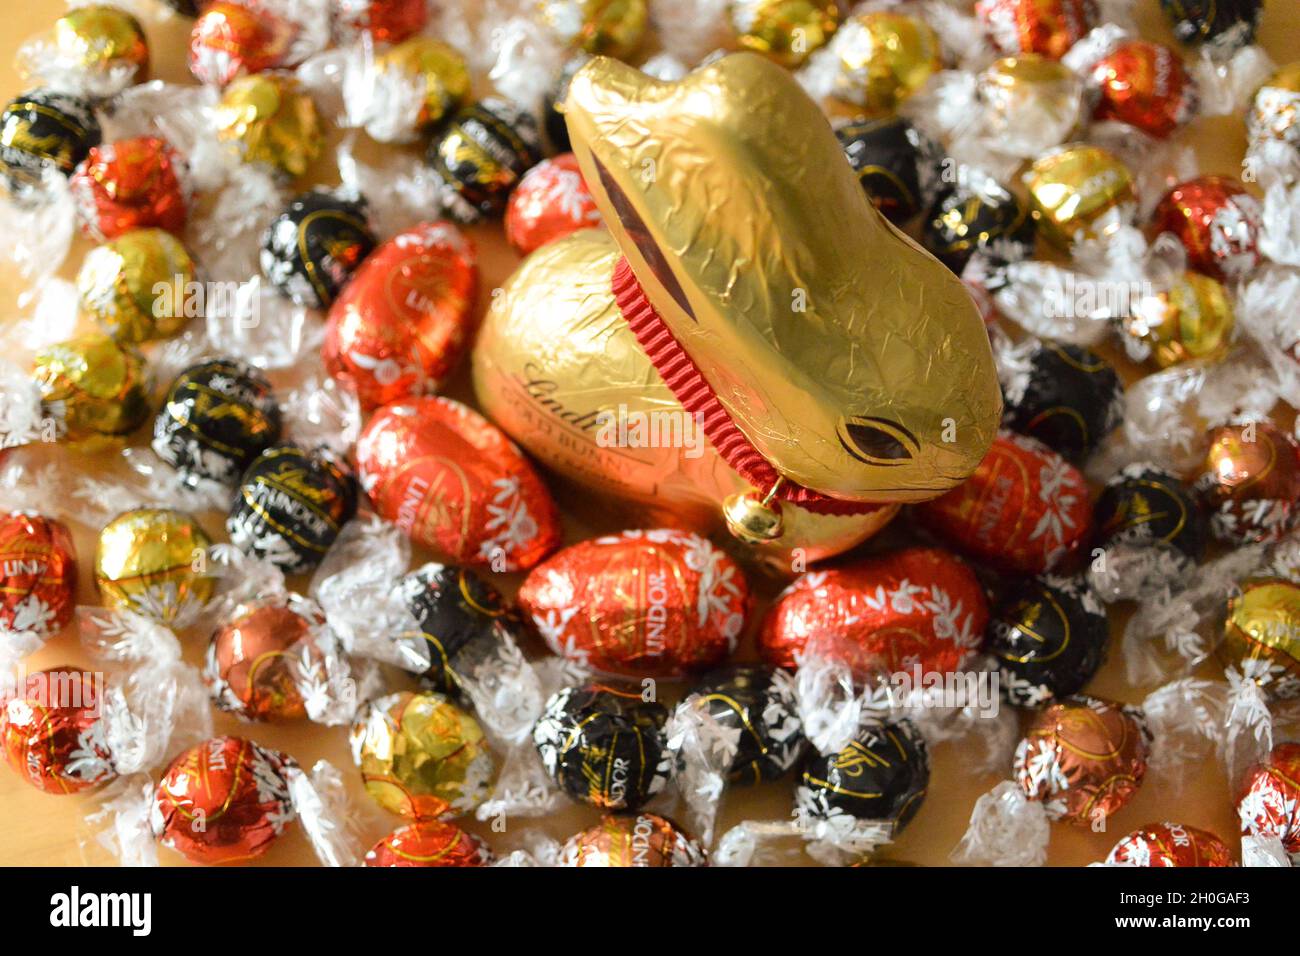 The iconic Lindt Chocolate Bunny wrapped in gold foil with distinctive red collar and bell, surrounded by mini chocolate Easter eggs and Lindor balls Stock Photo